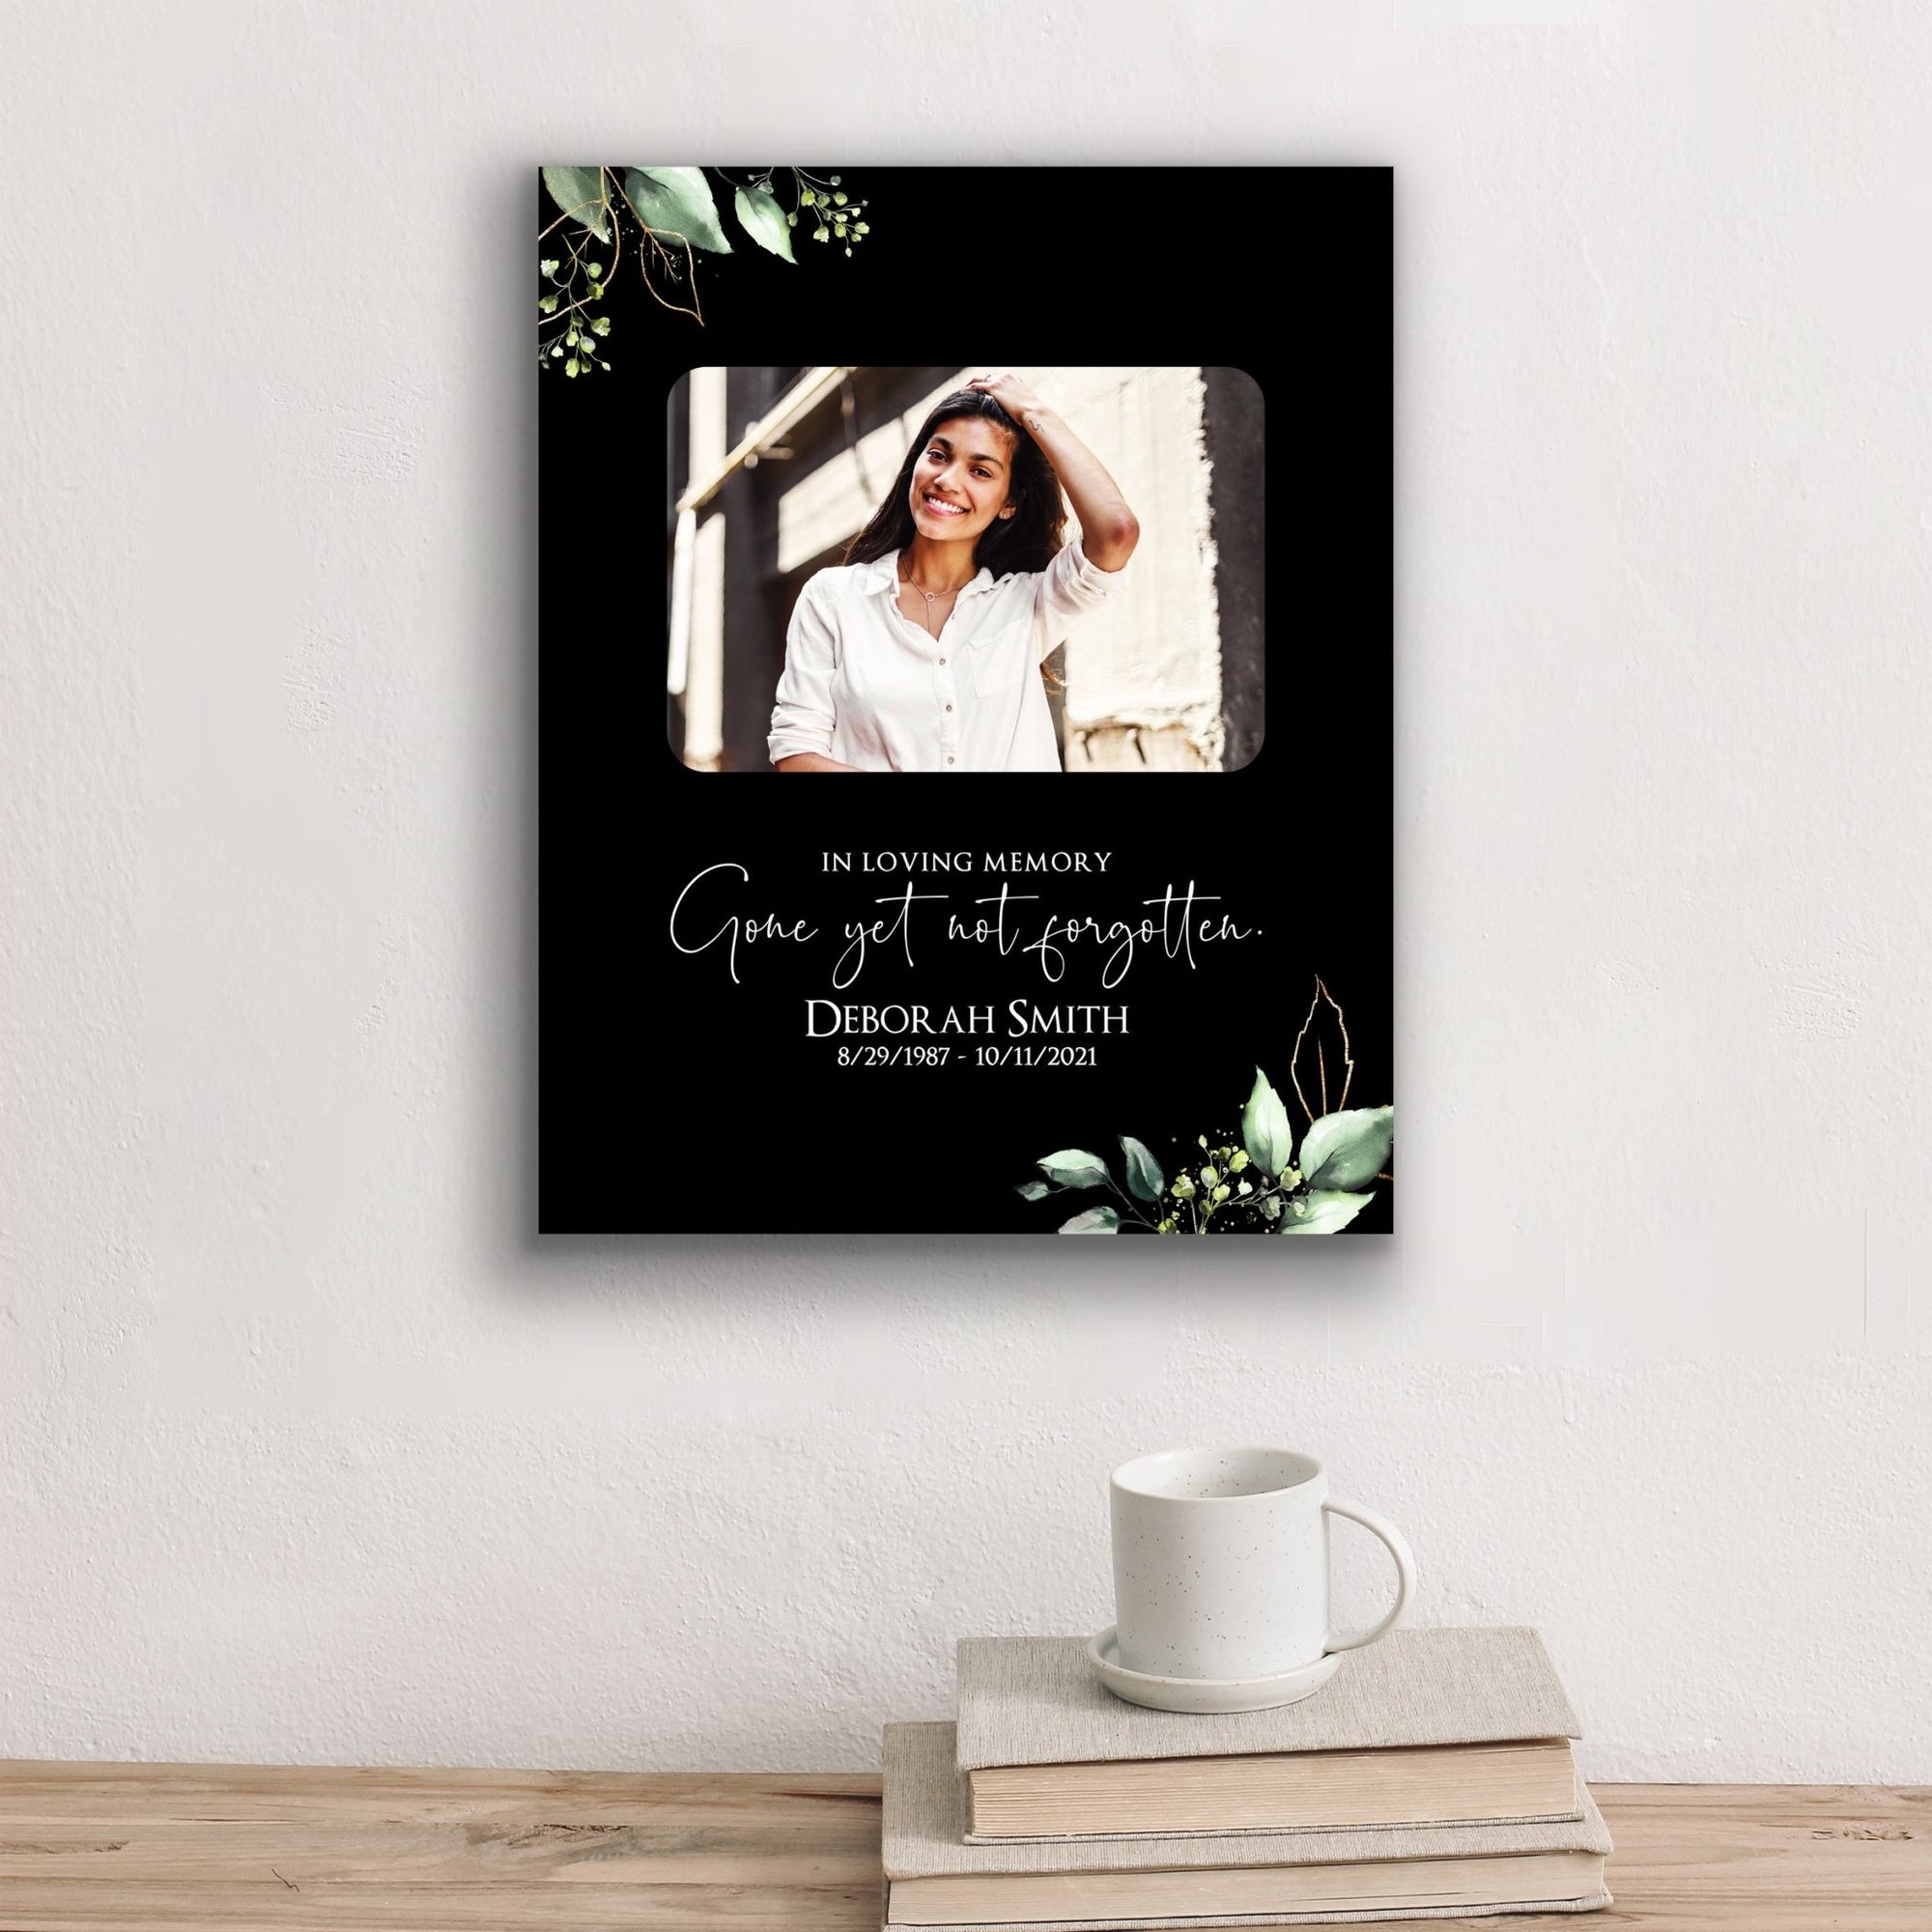 Personalized Human Memorial Black Photo & Inspirational Verse Bereavement Wall Décor & Sympathy Gift Ideas - In Loving Memory - LifeSong Milestones